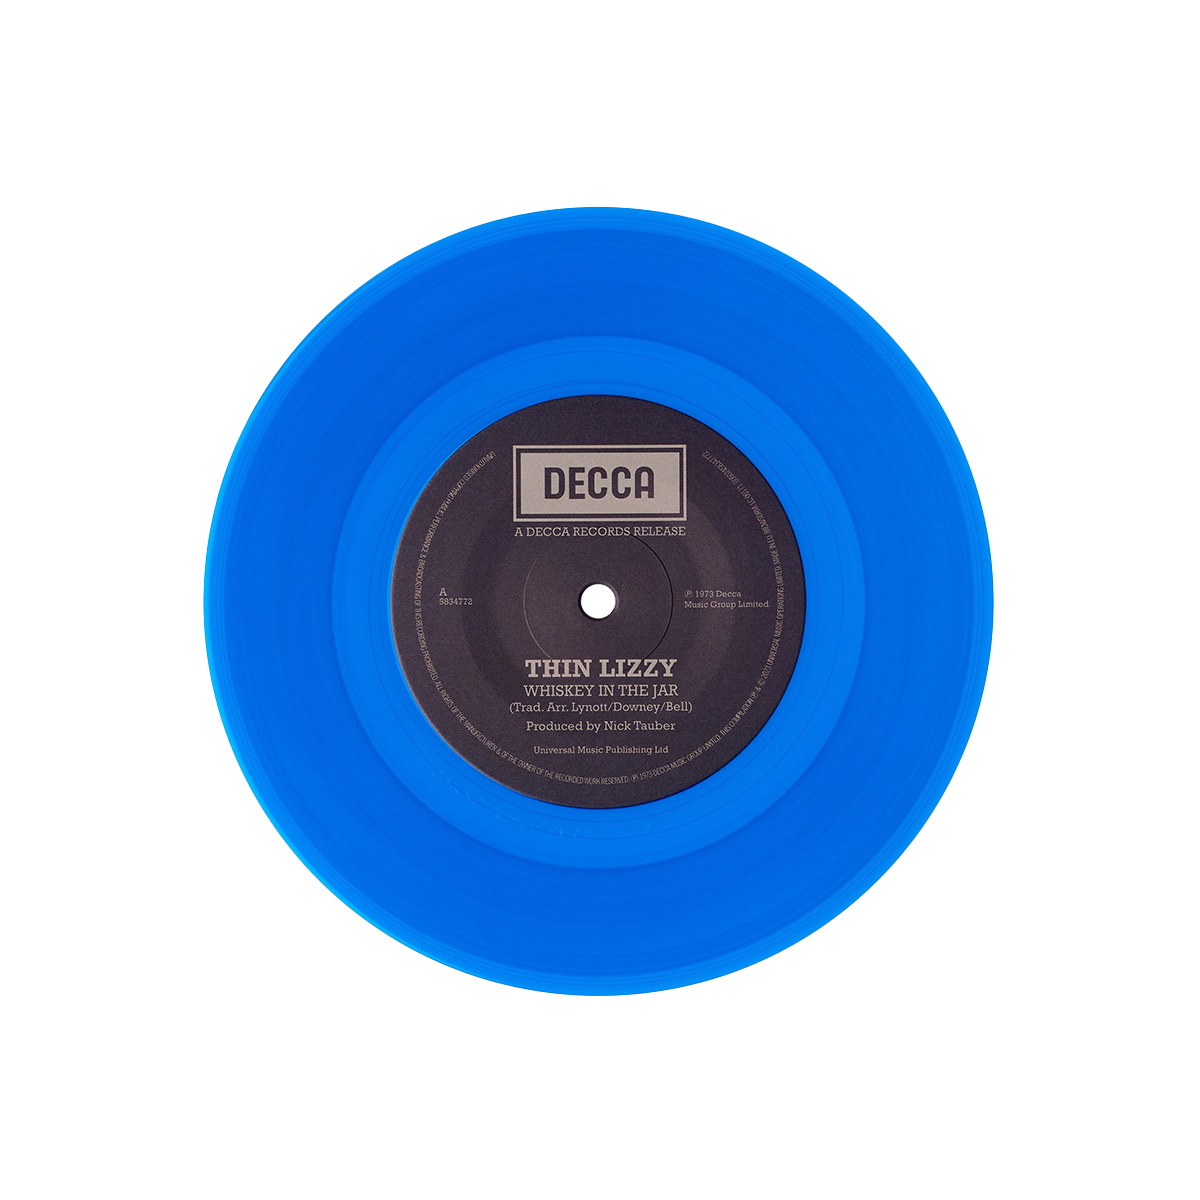 Thin Lizzy - Whiskey in the Jar: Exclusive Blue Vinyl 7" Single